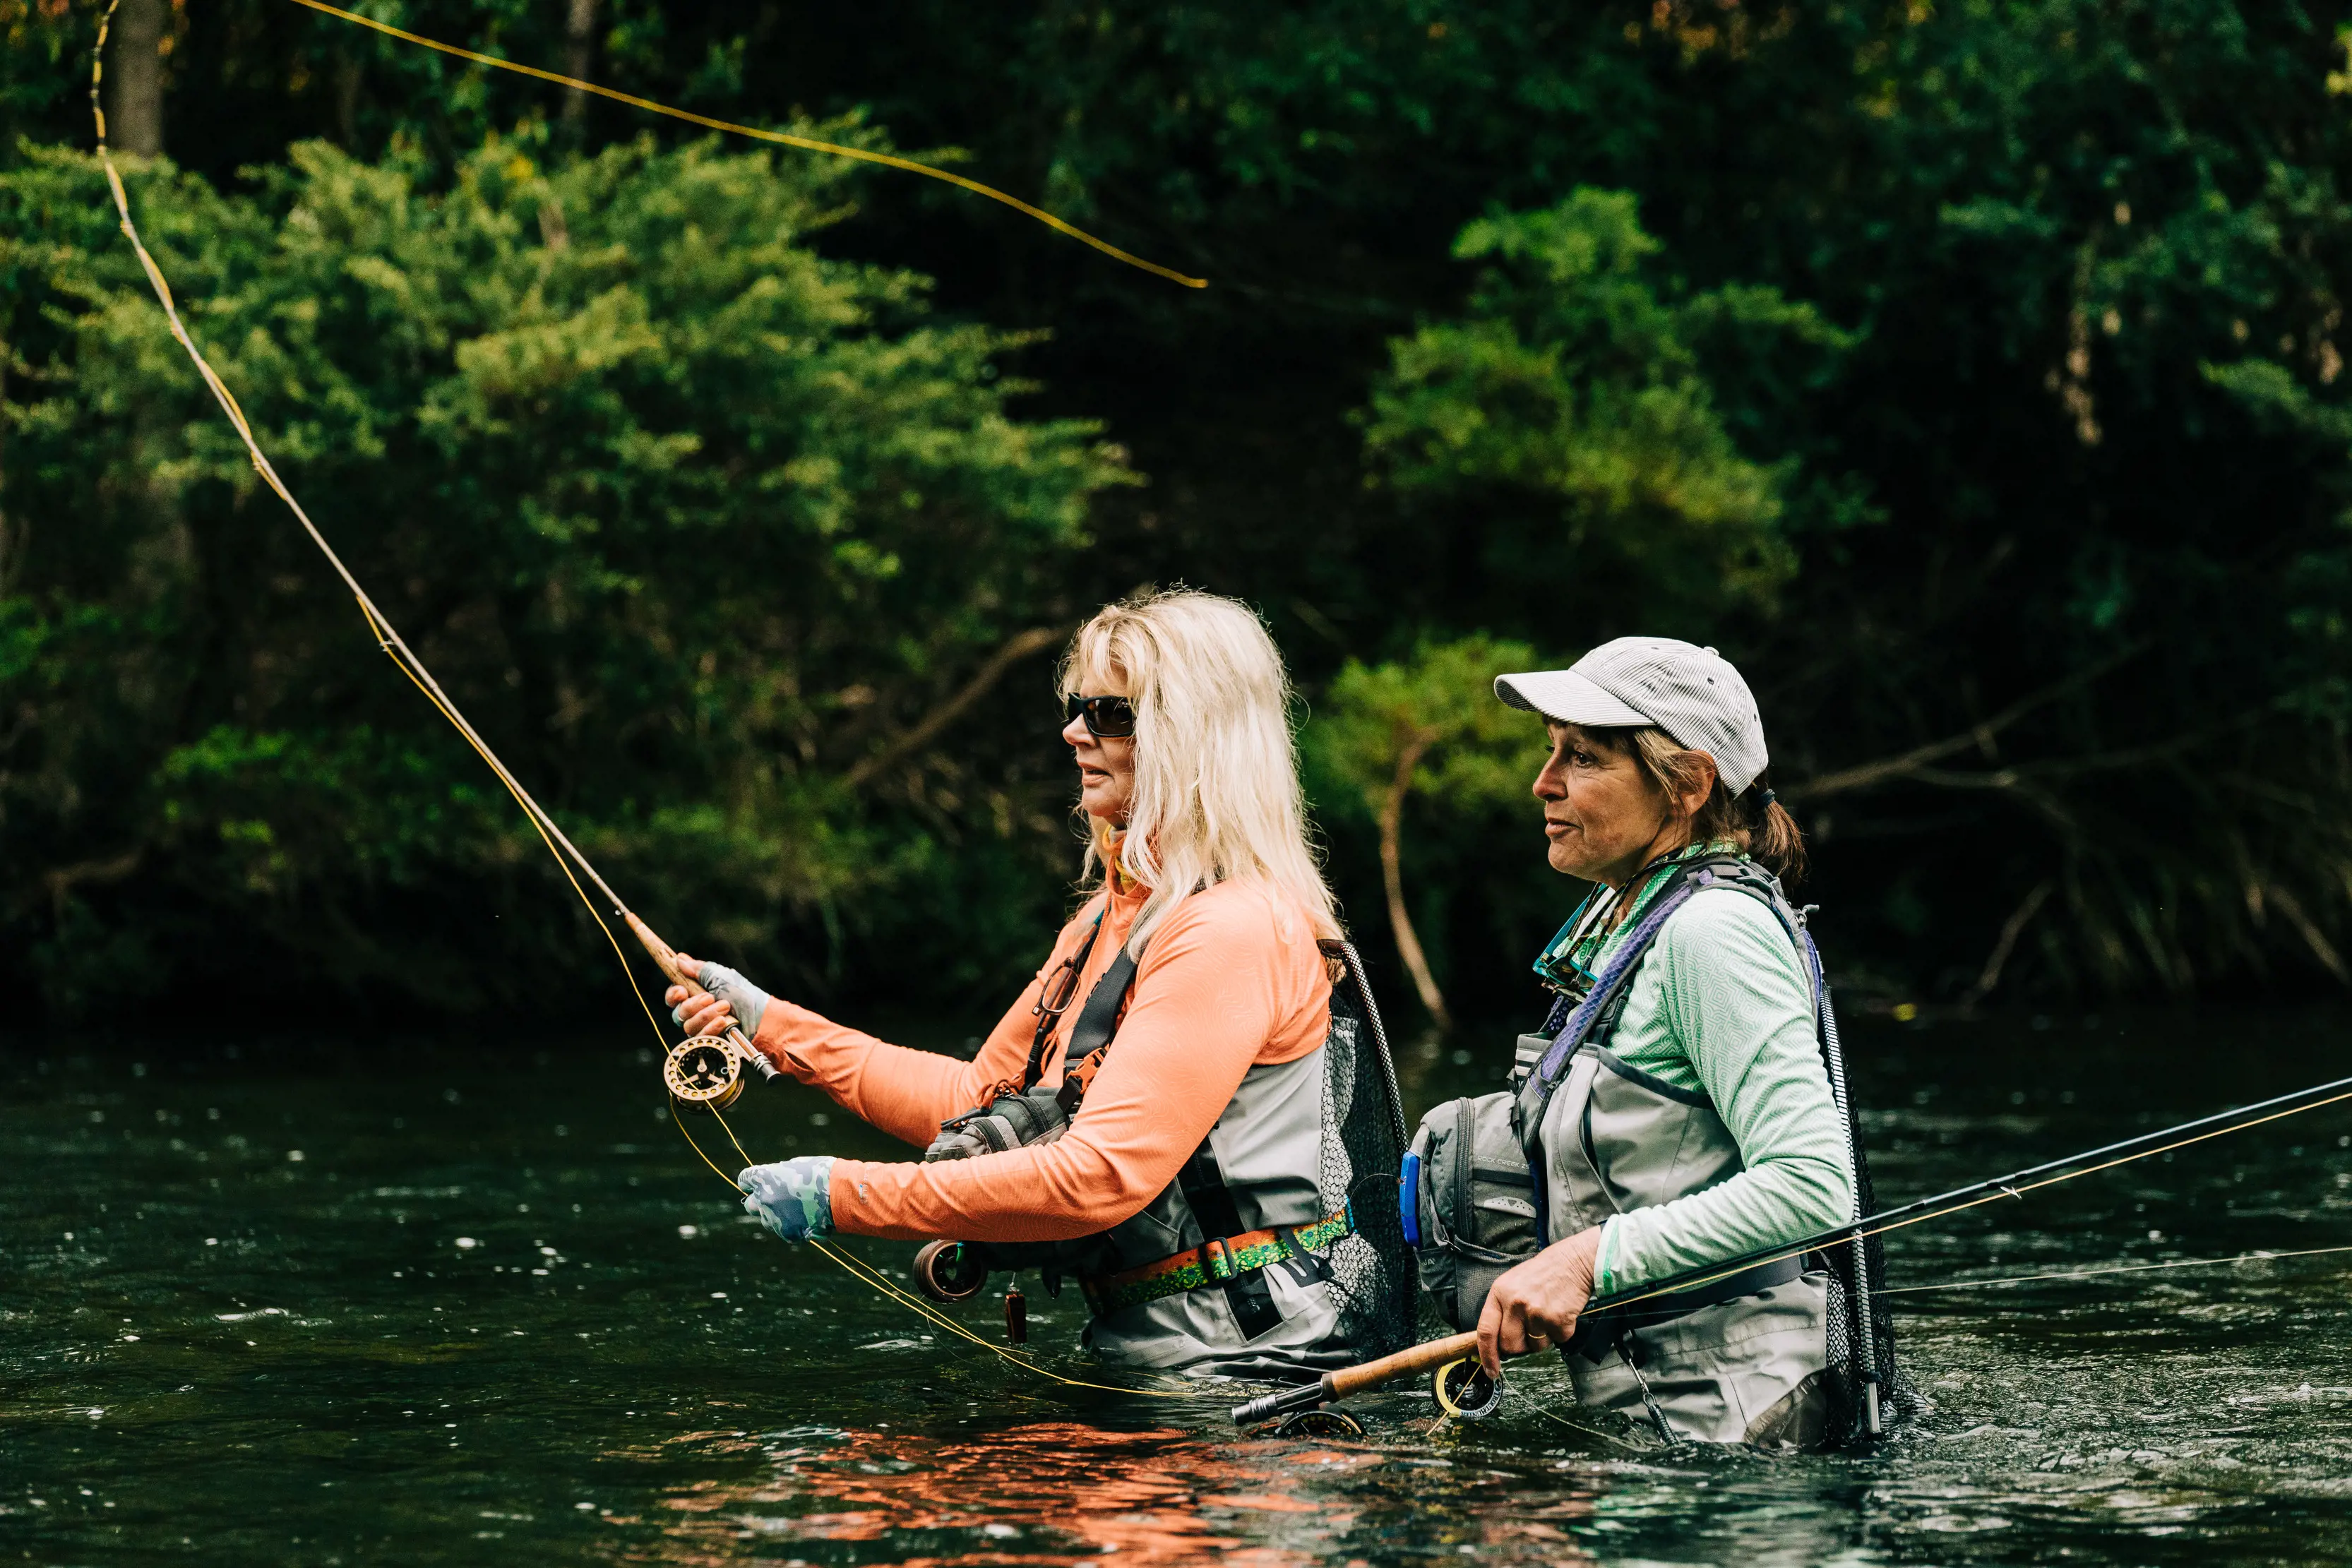 Fly fishing on the Meander River